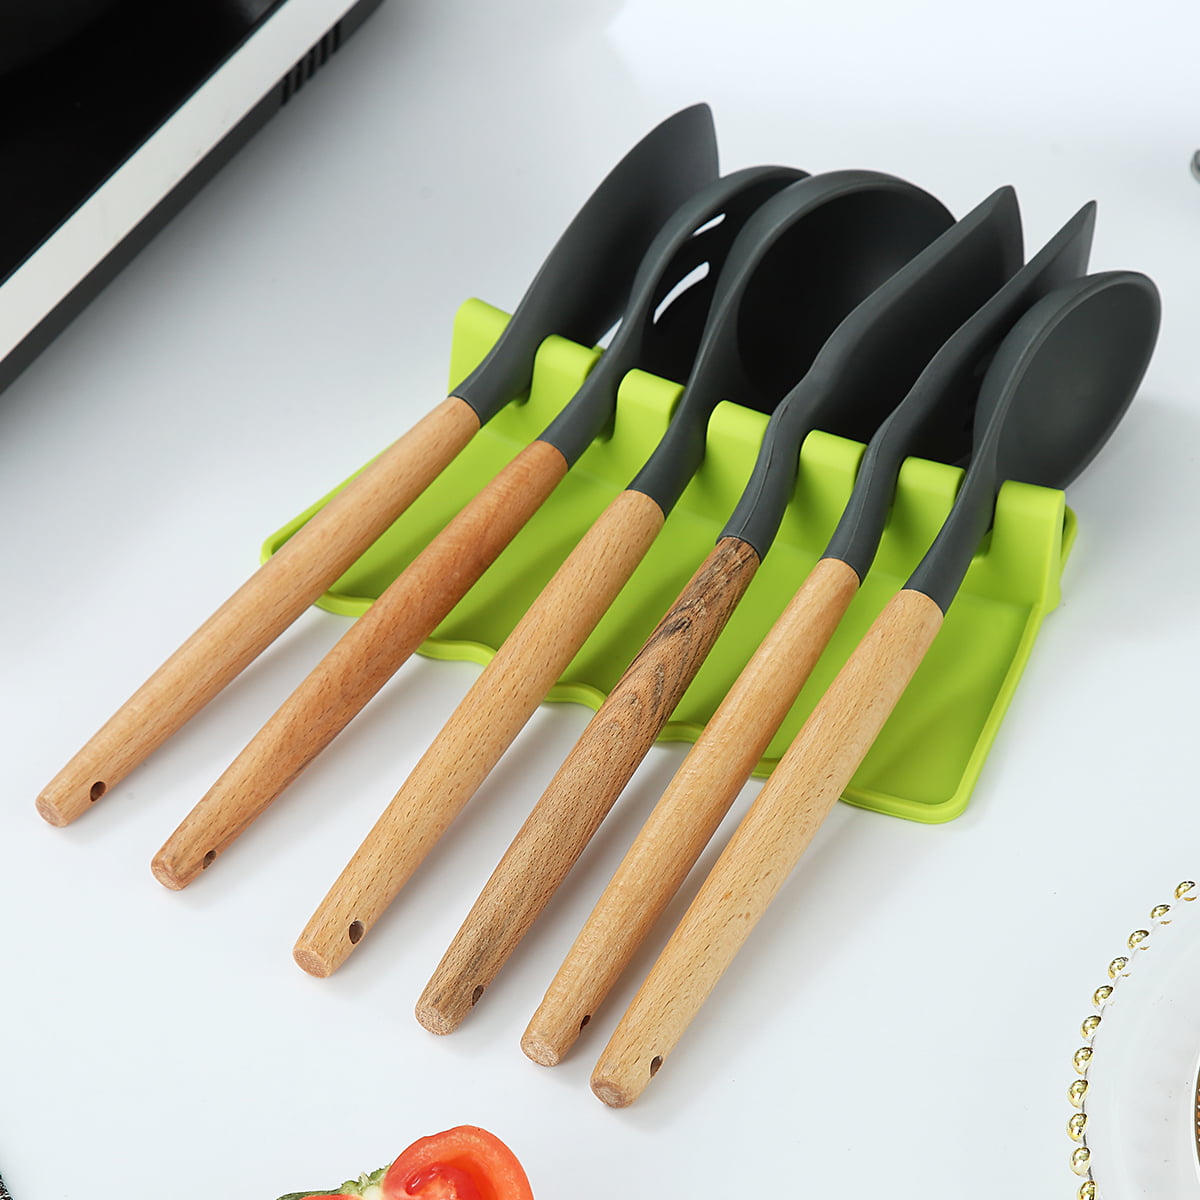 Handy Gourmet 4 Slot Silicone Utensil Rest - On Sale - Bed Bath & Beyond -  32301799